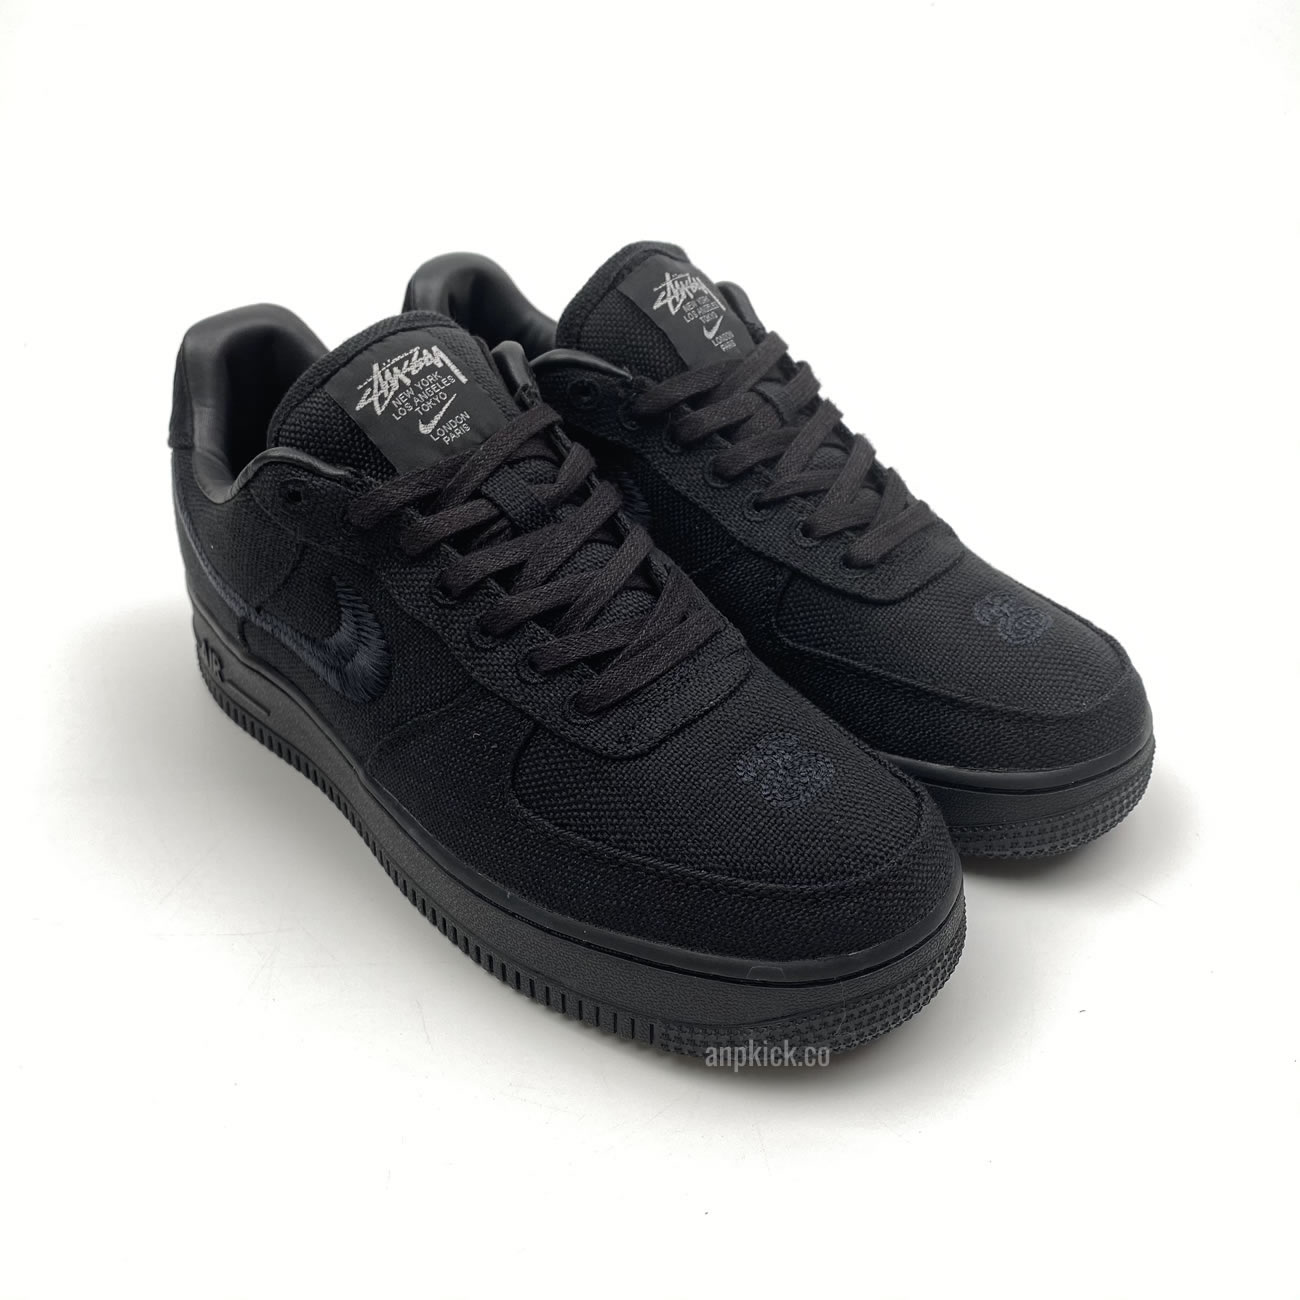 Stussy Nike Air Force 1 Low Black Cz9084 001 Release Date (2) - newkick.org